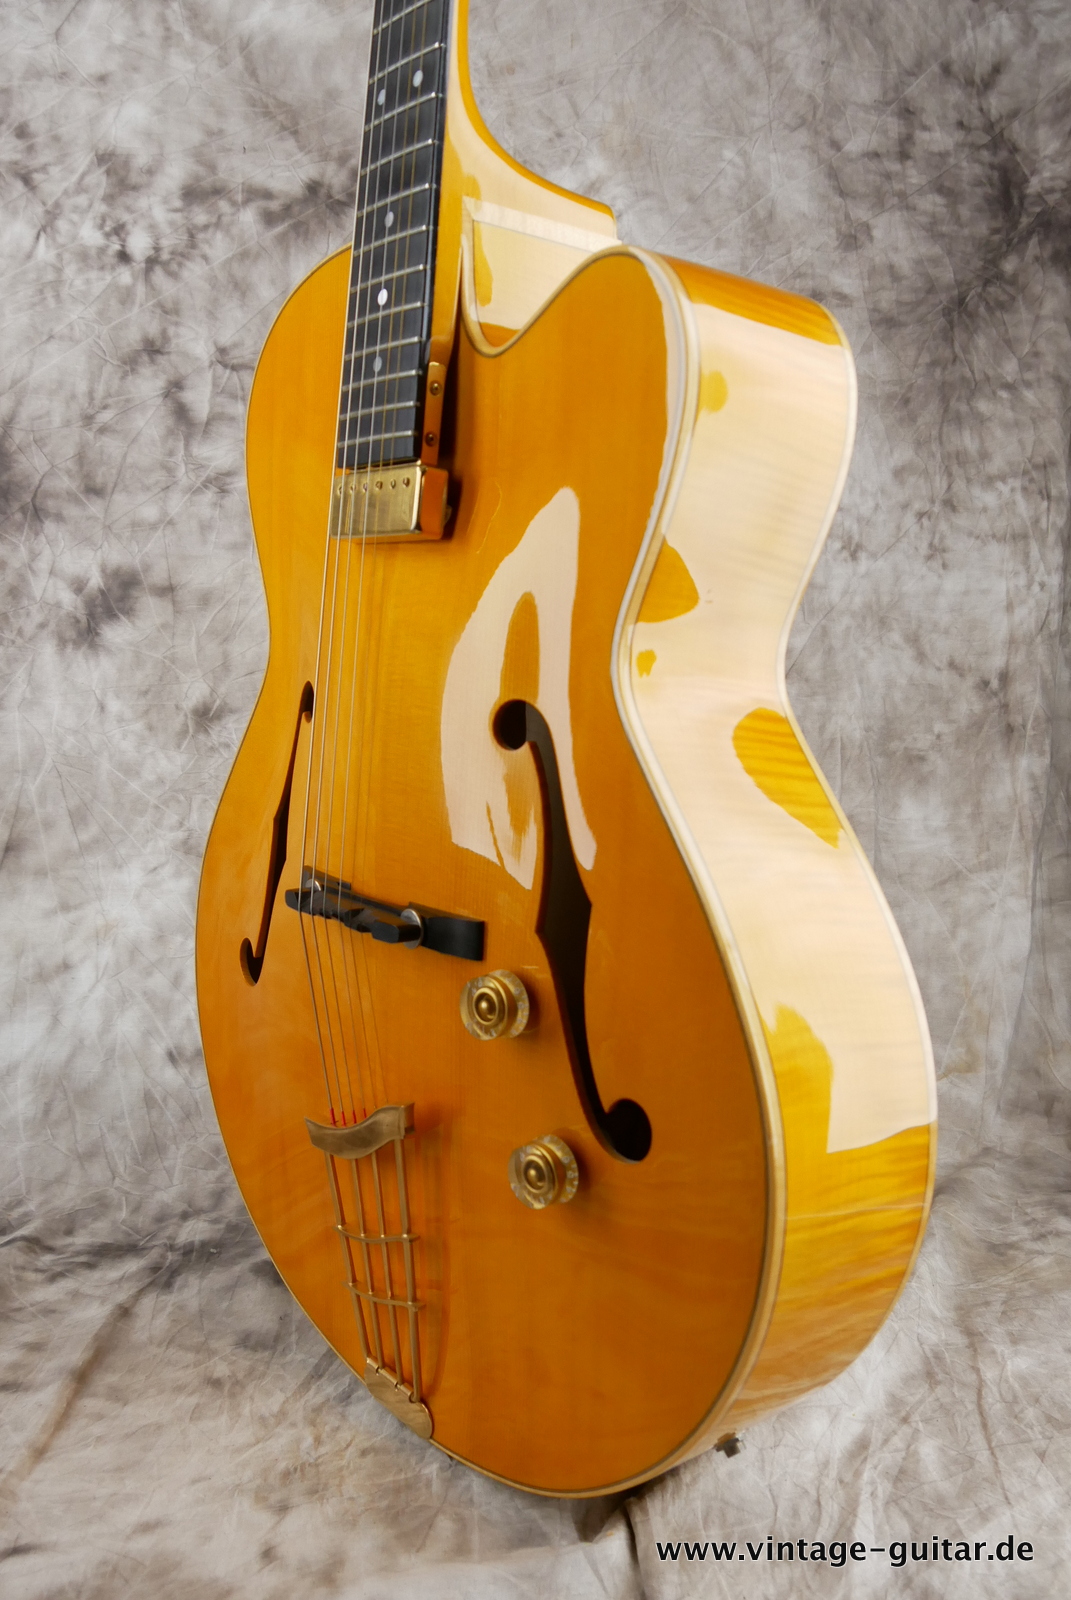 img/vintage/5298/Launhardt_Fs3_german_guitar_archtop_all_solid-006.JPG